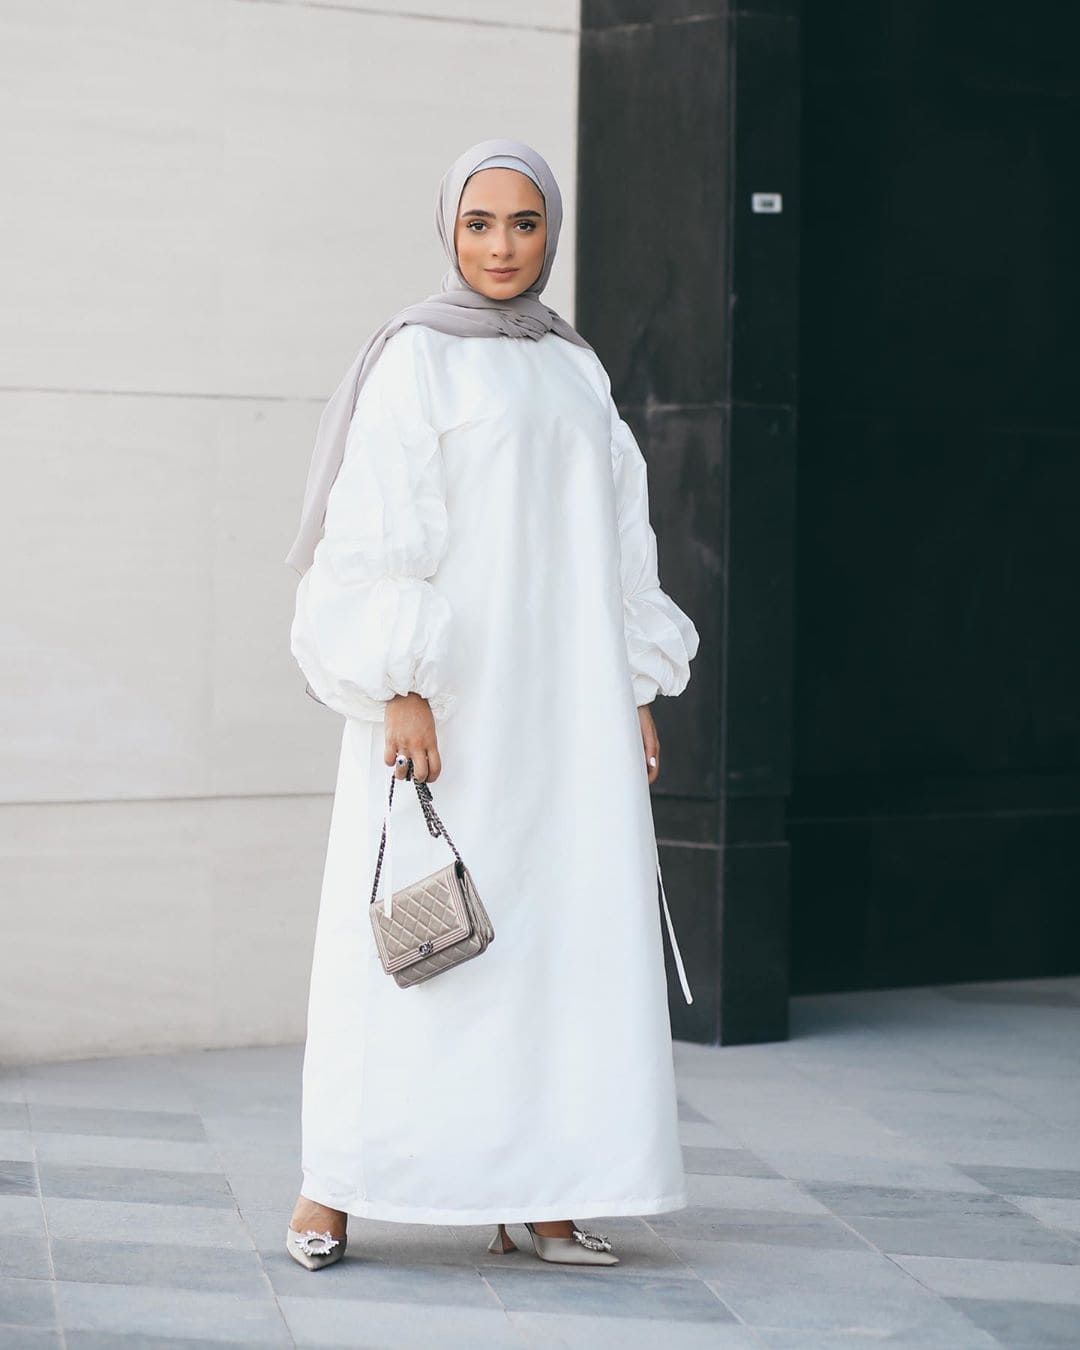 Hijab Colors To Adopt With An All White Outfit - Hijab Fashion Inspiration